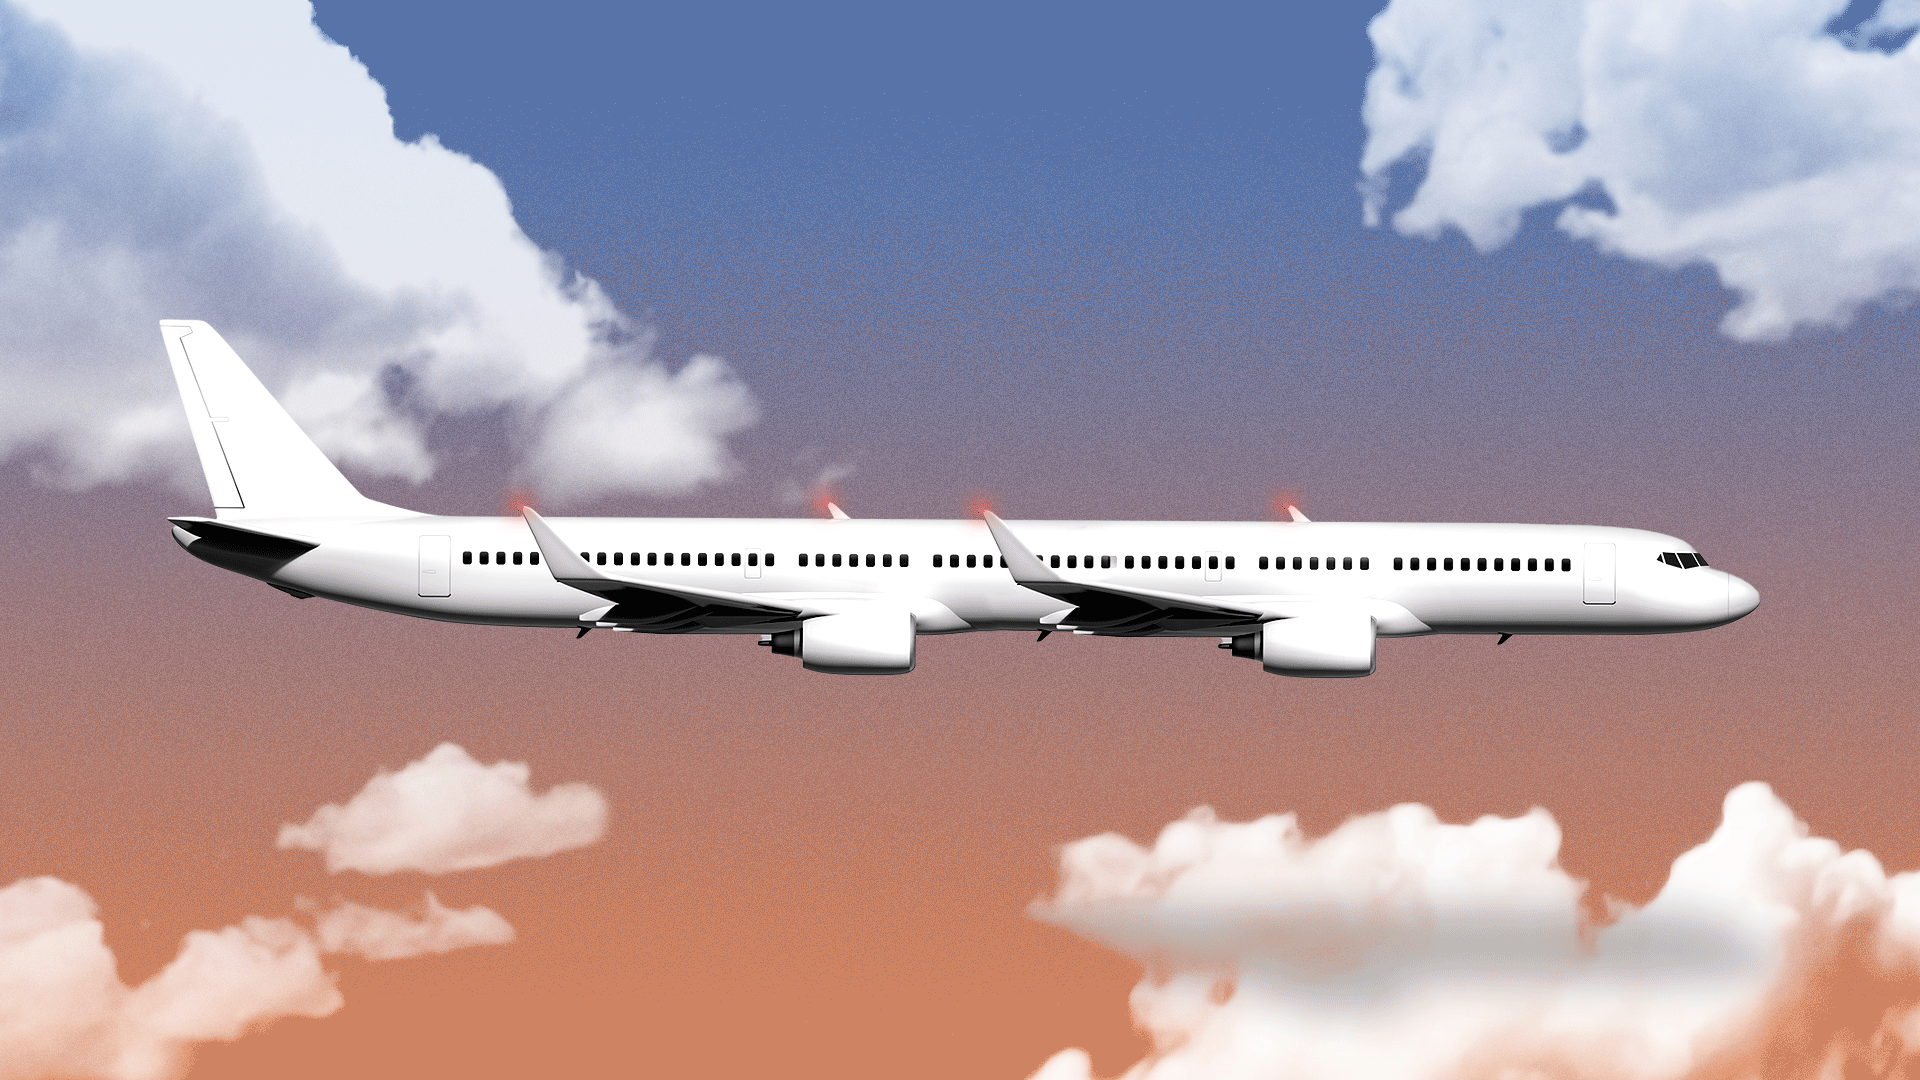 Animated illustration of a super long plane with four wings. 